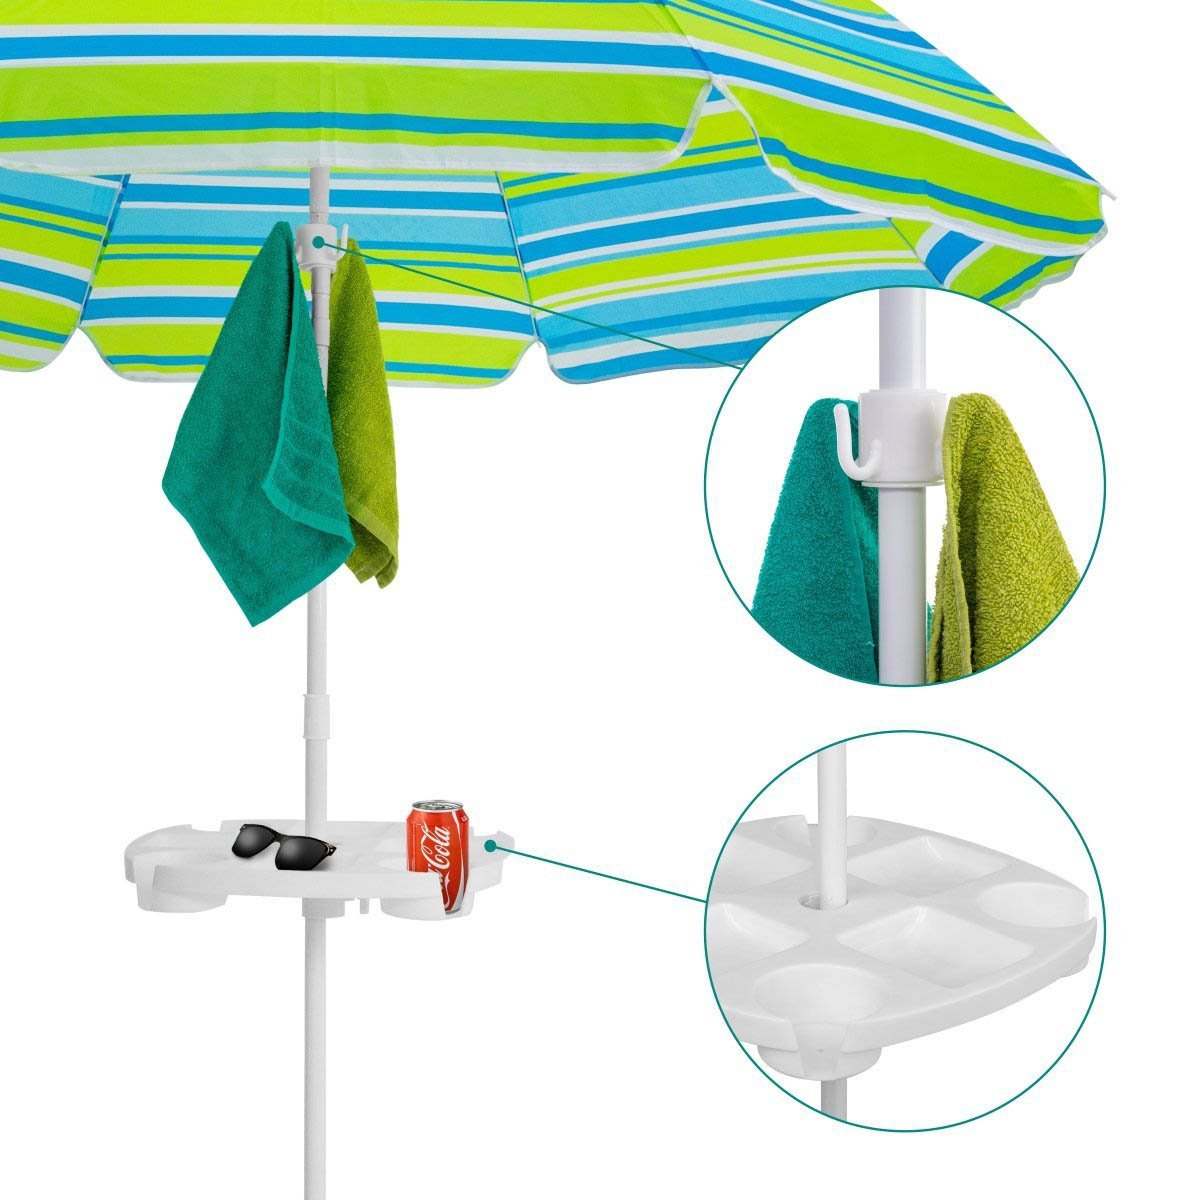 Fixing the Beach Umbrella Table Tray, you may use it for storing things and towels